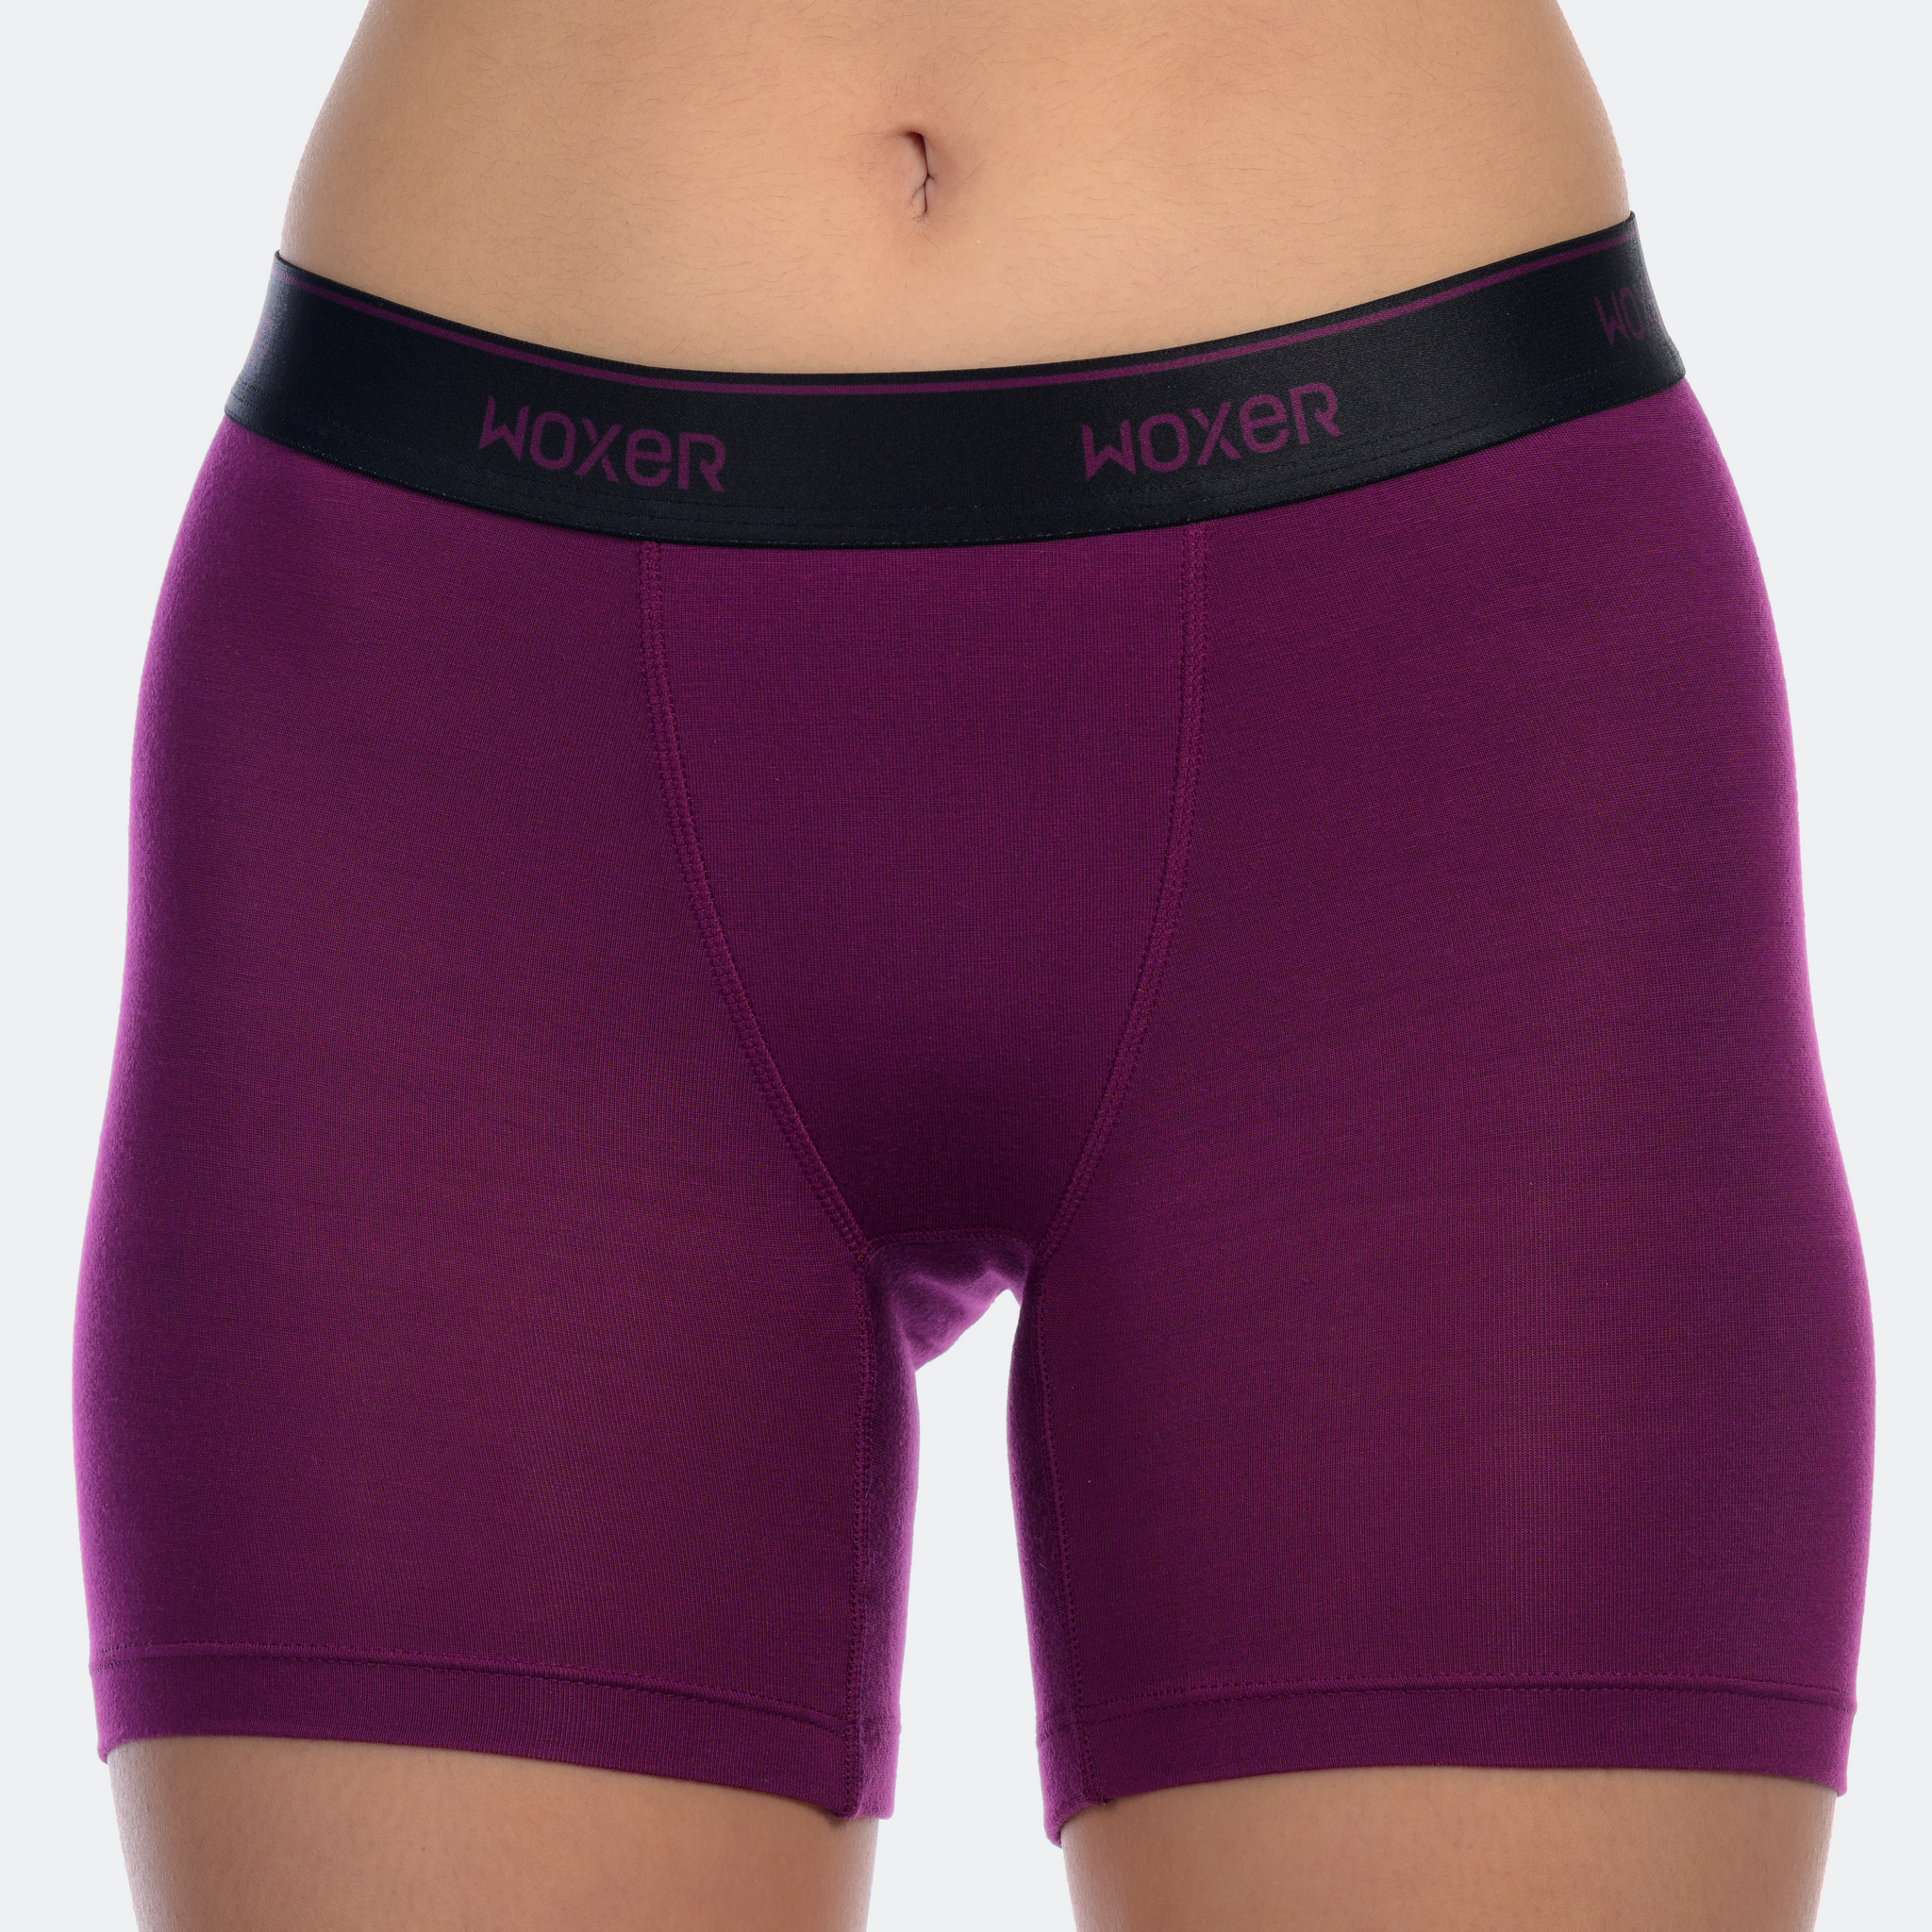 Woxer Baller 3-Pack - Small at  Women's Clothing store